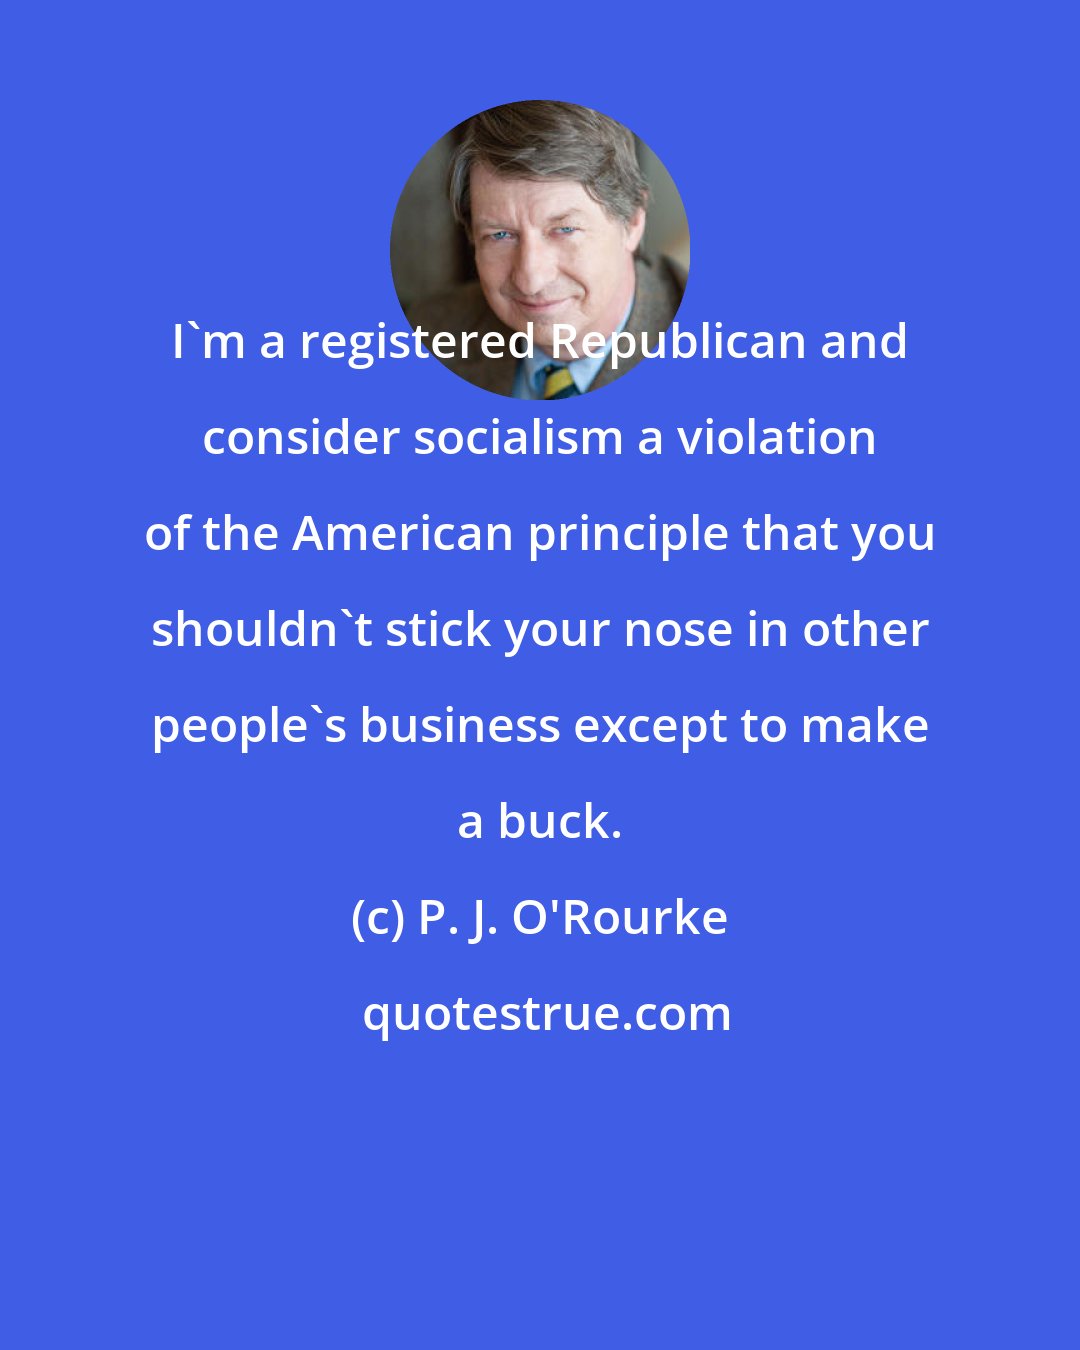 P. J. O'Rourke: I'm a registered Republican and consider socialism a violation of the American principle that you shouldn't stick your nose in other people's business except to make a buck.